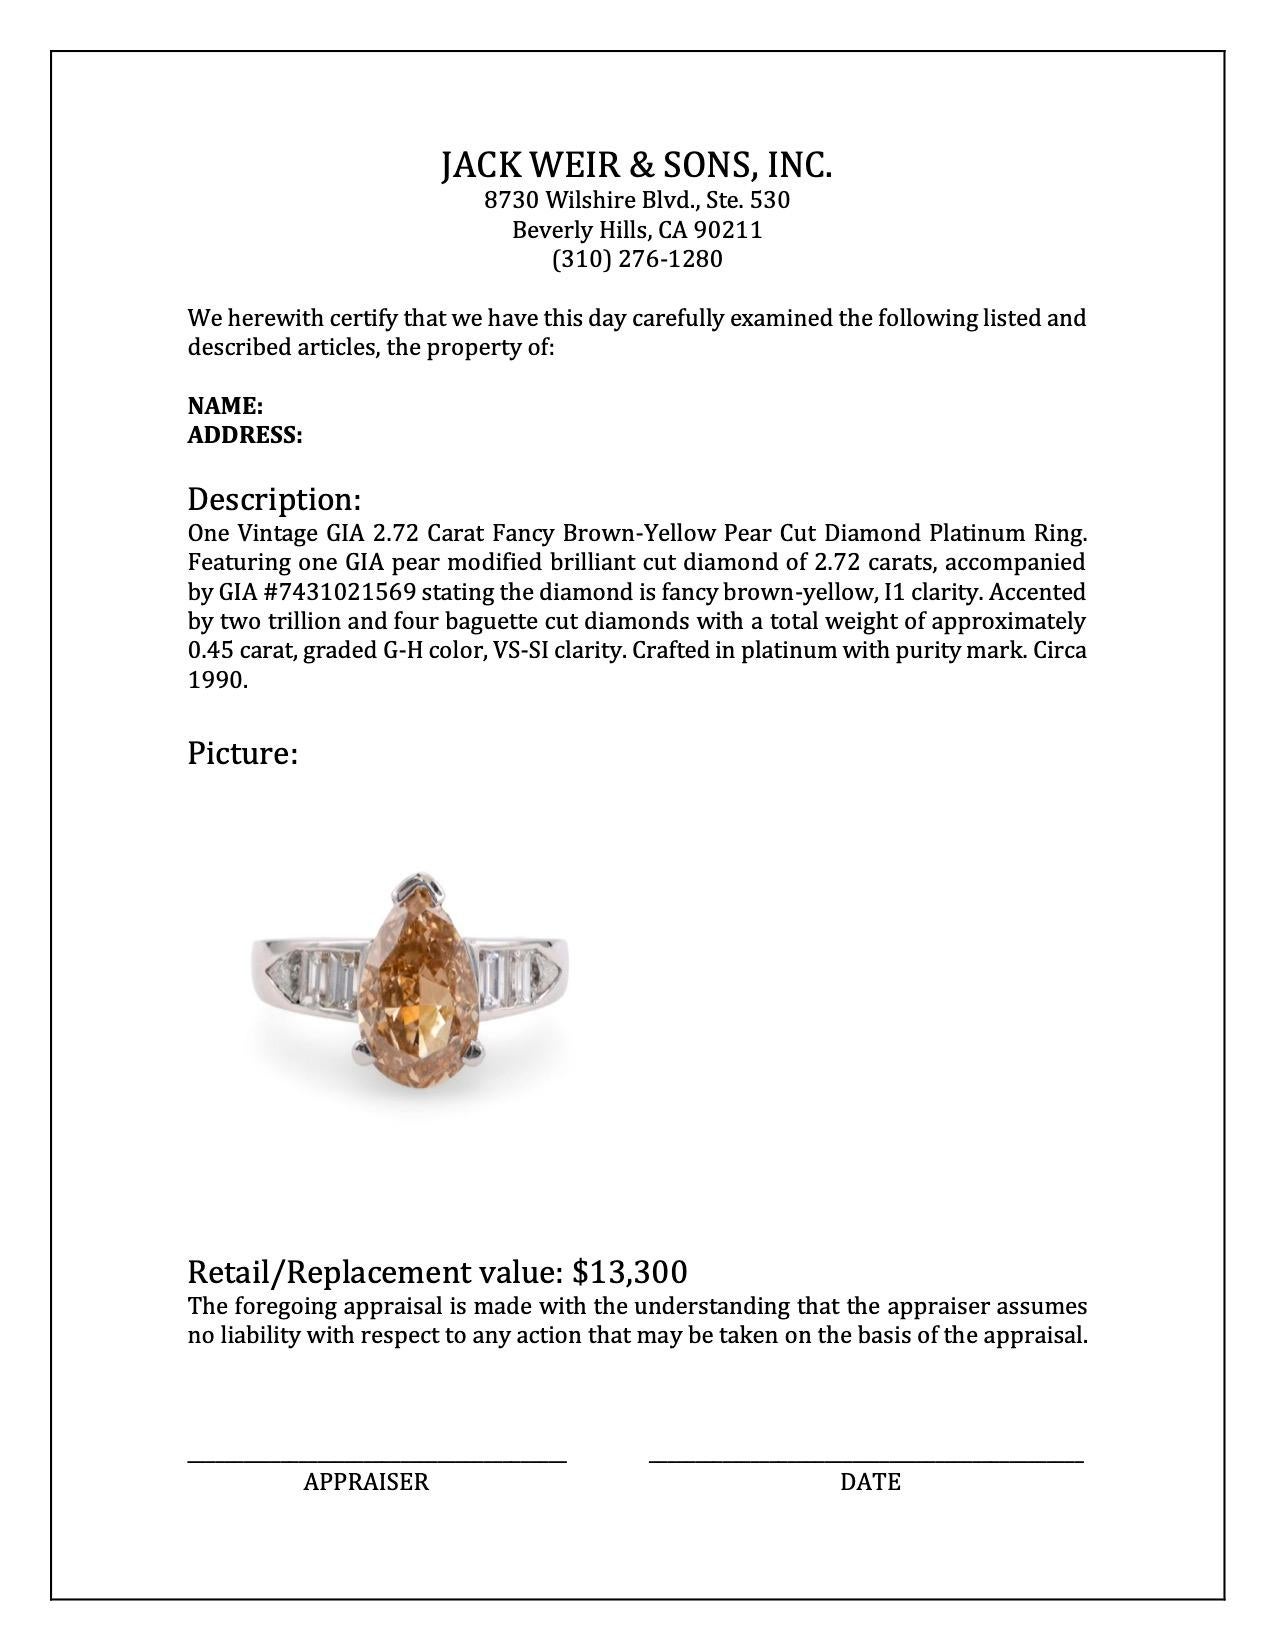 Vintage GIA 2.72 Carat Fancy Brown-Yellow Pear Cut Diamond Platinum Ring For Sale 3